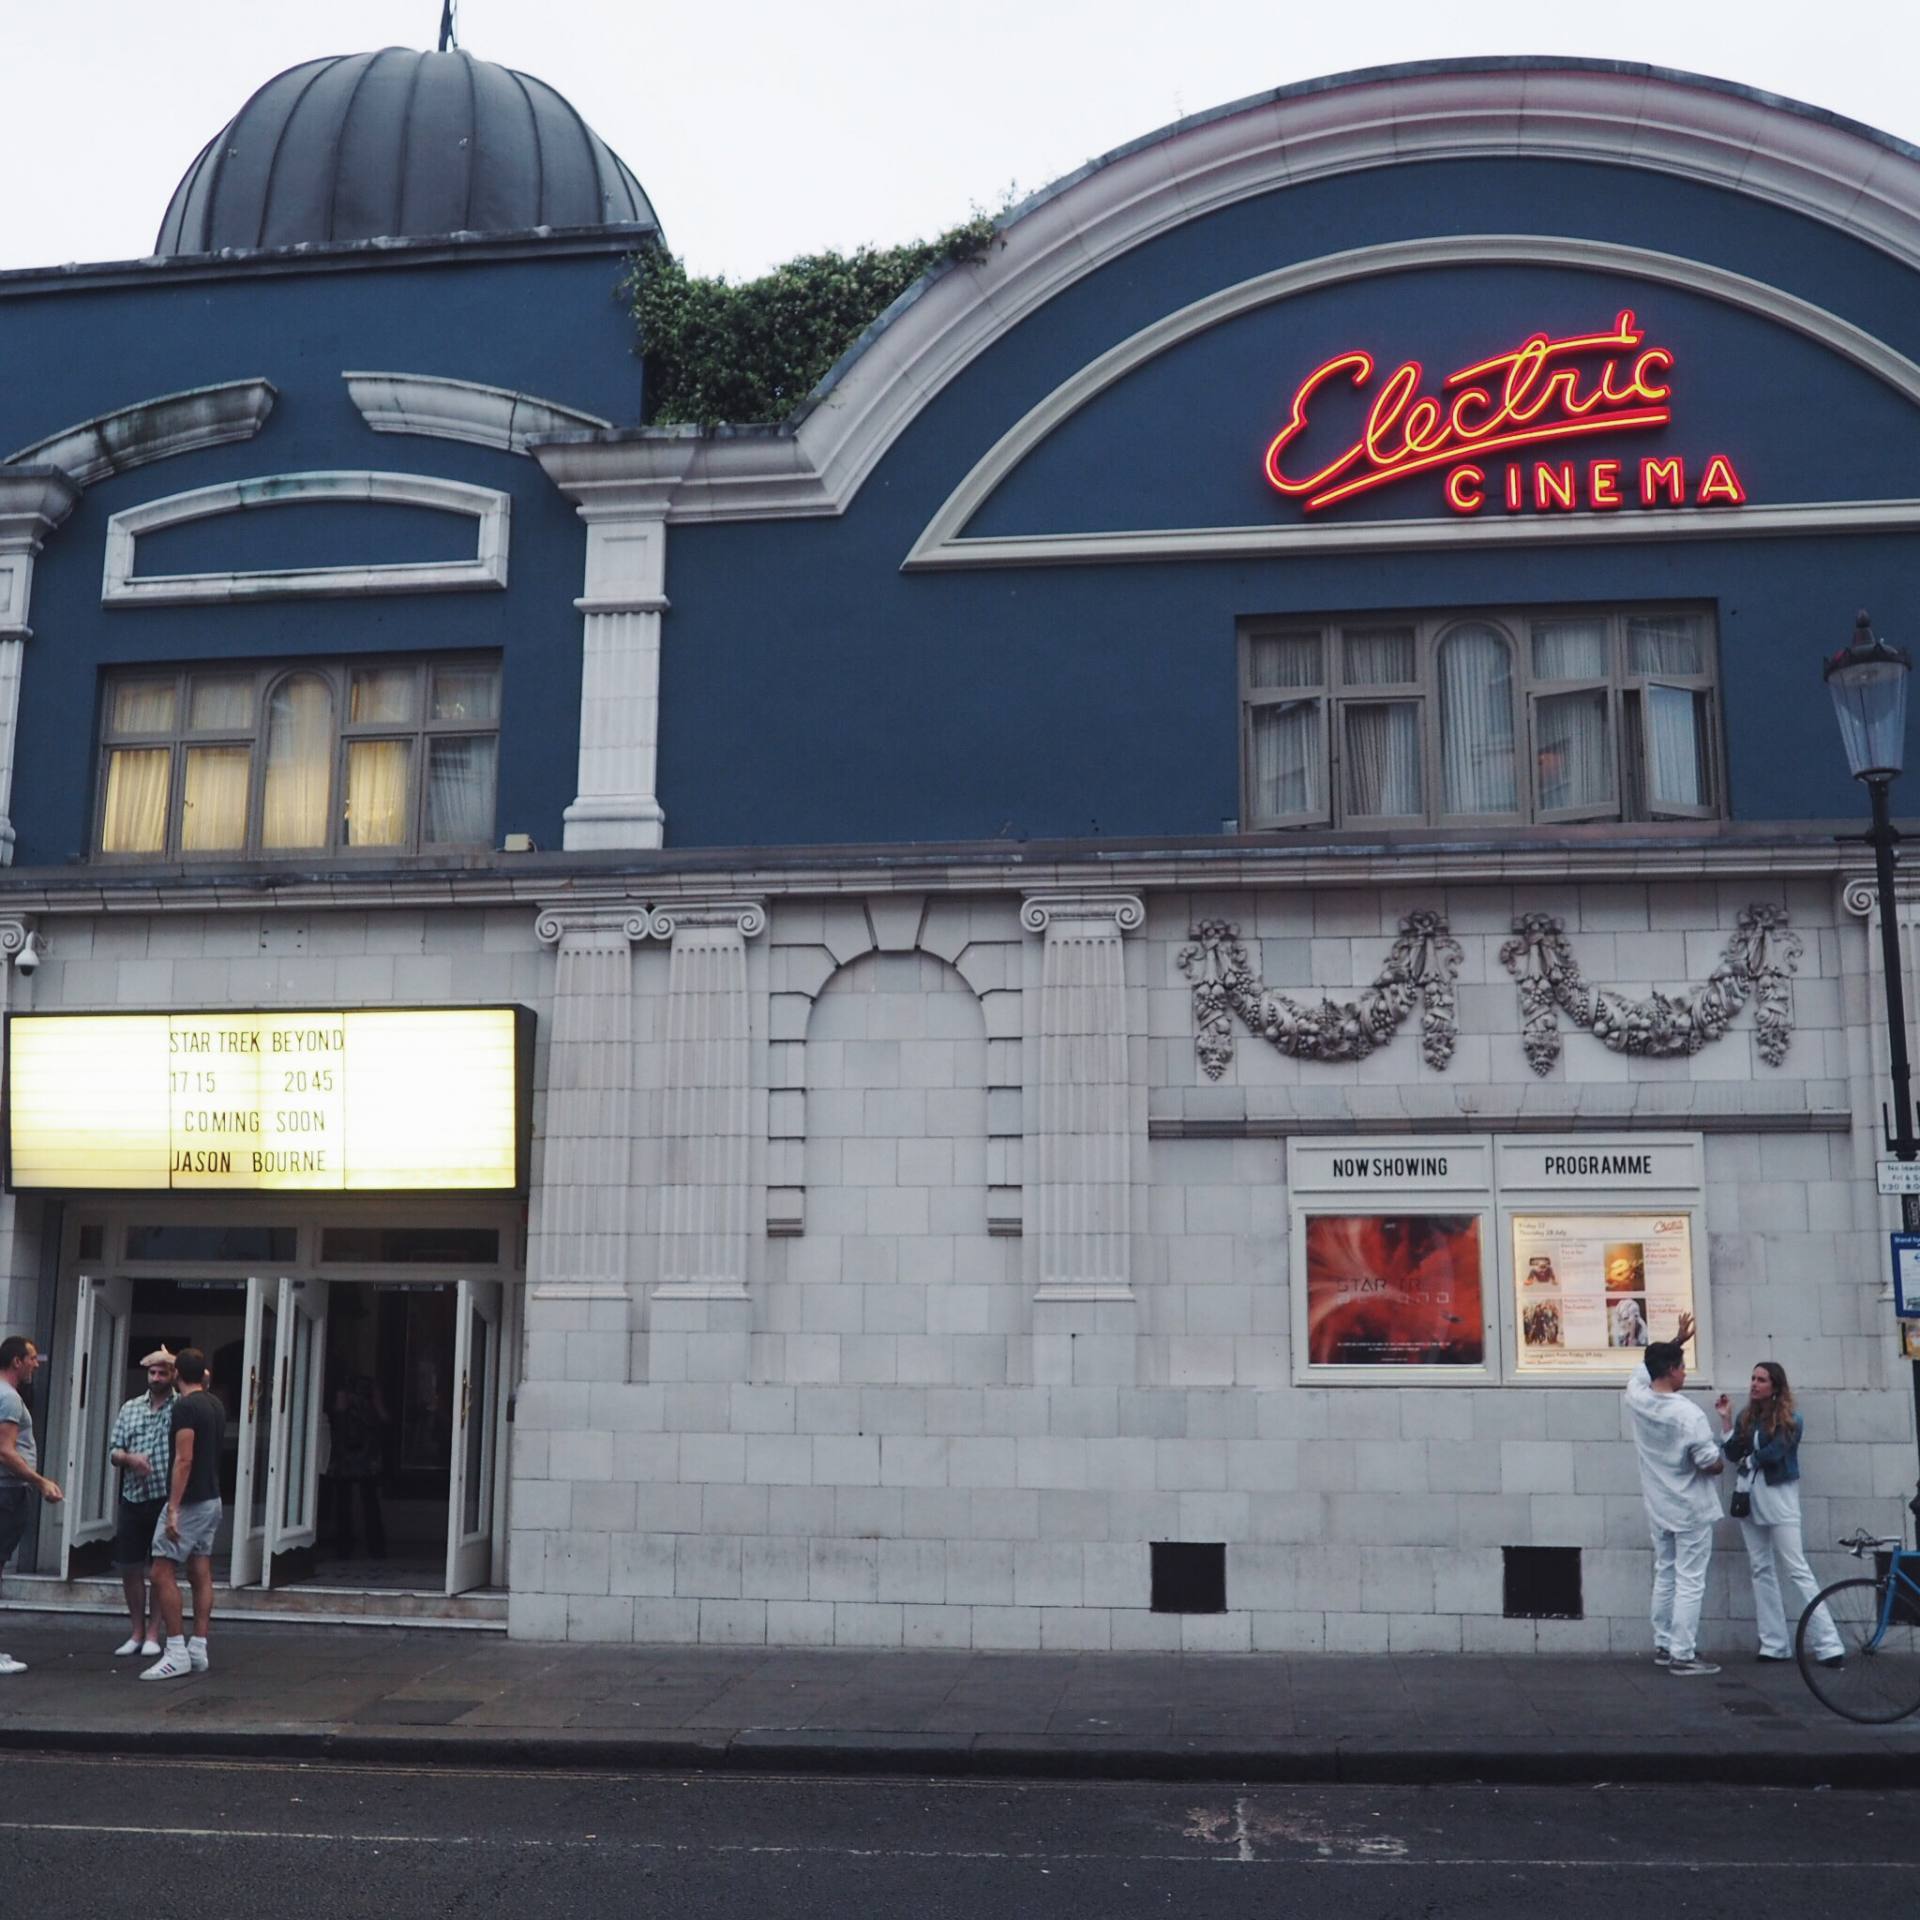 Electric Cinema, Notting Hill